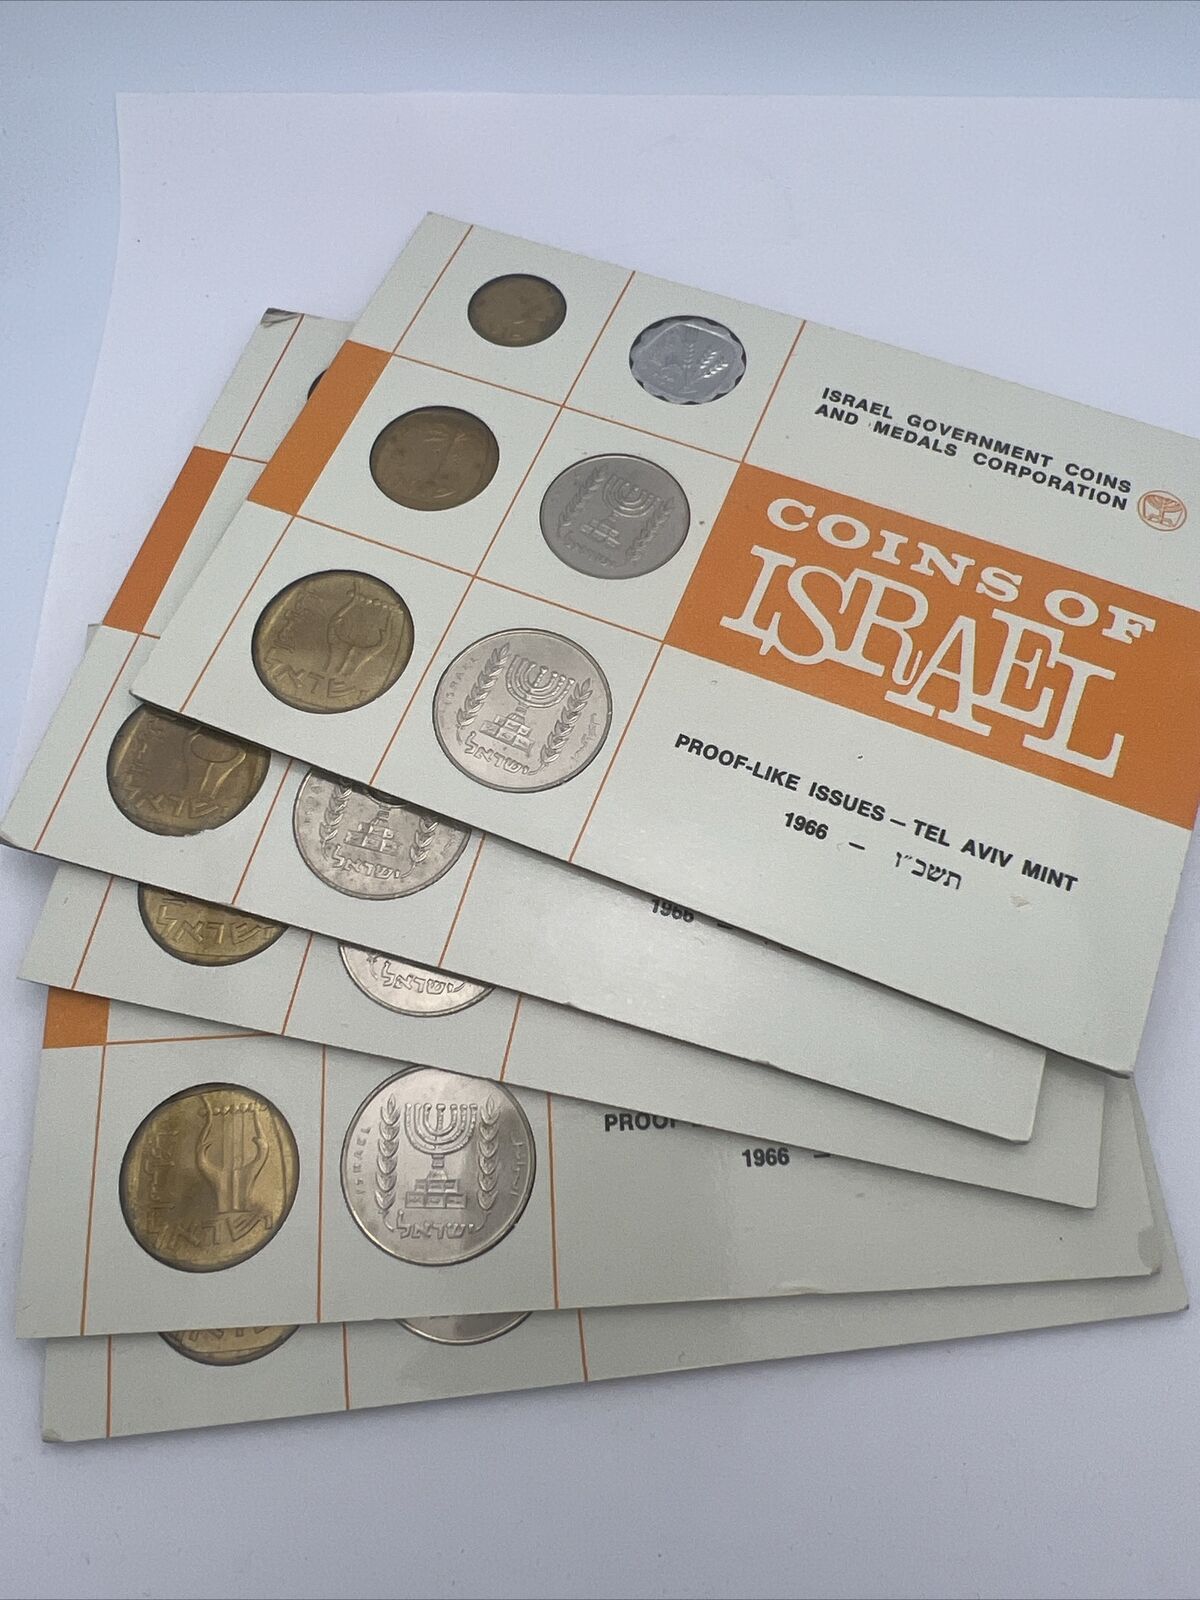 Coins of Israel 1966 Proof Like Issues Tel Aviv Mint- 6 Coins Each